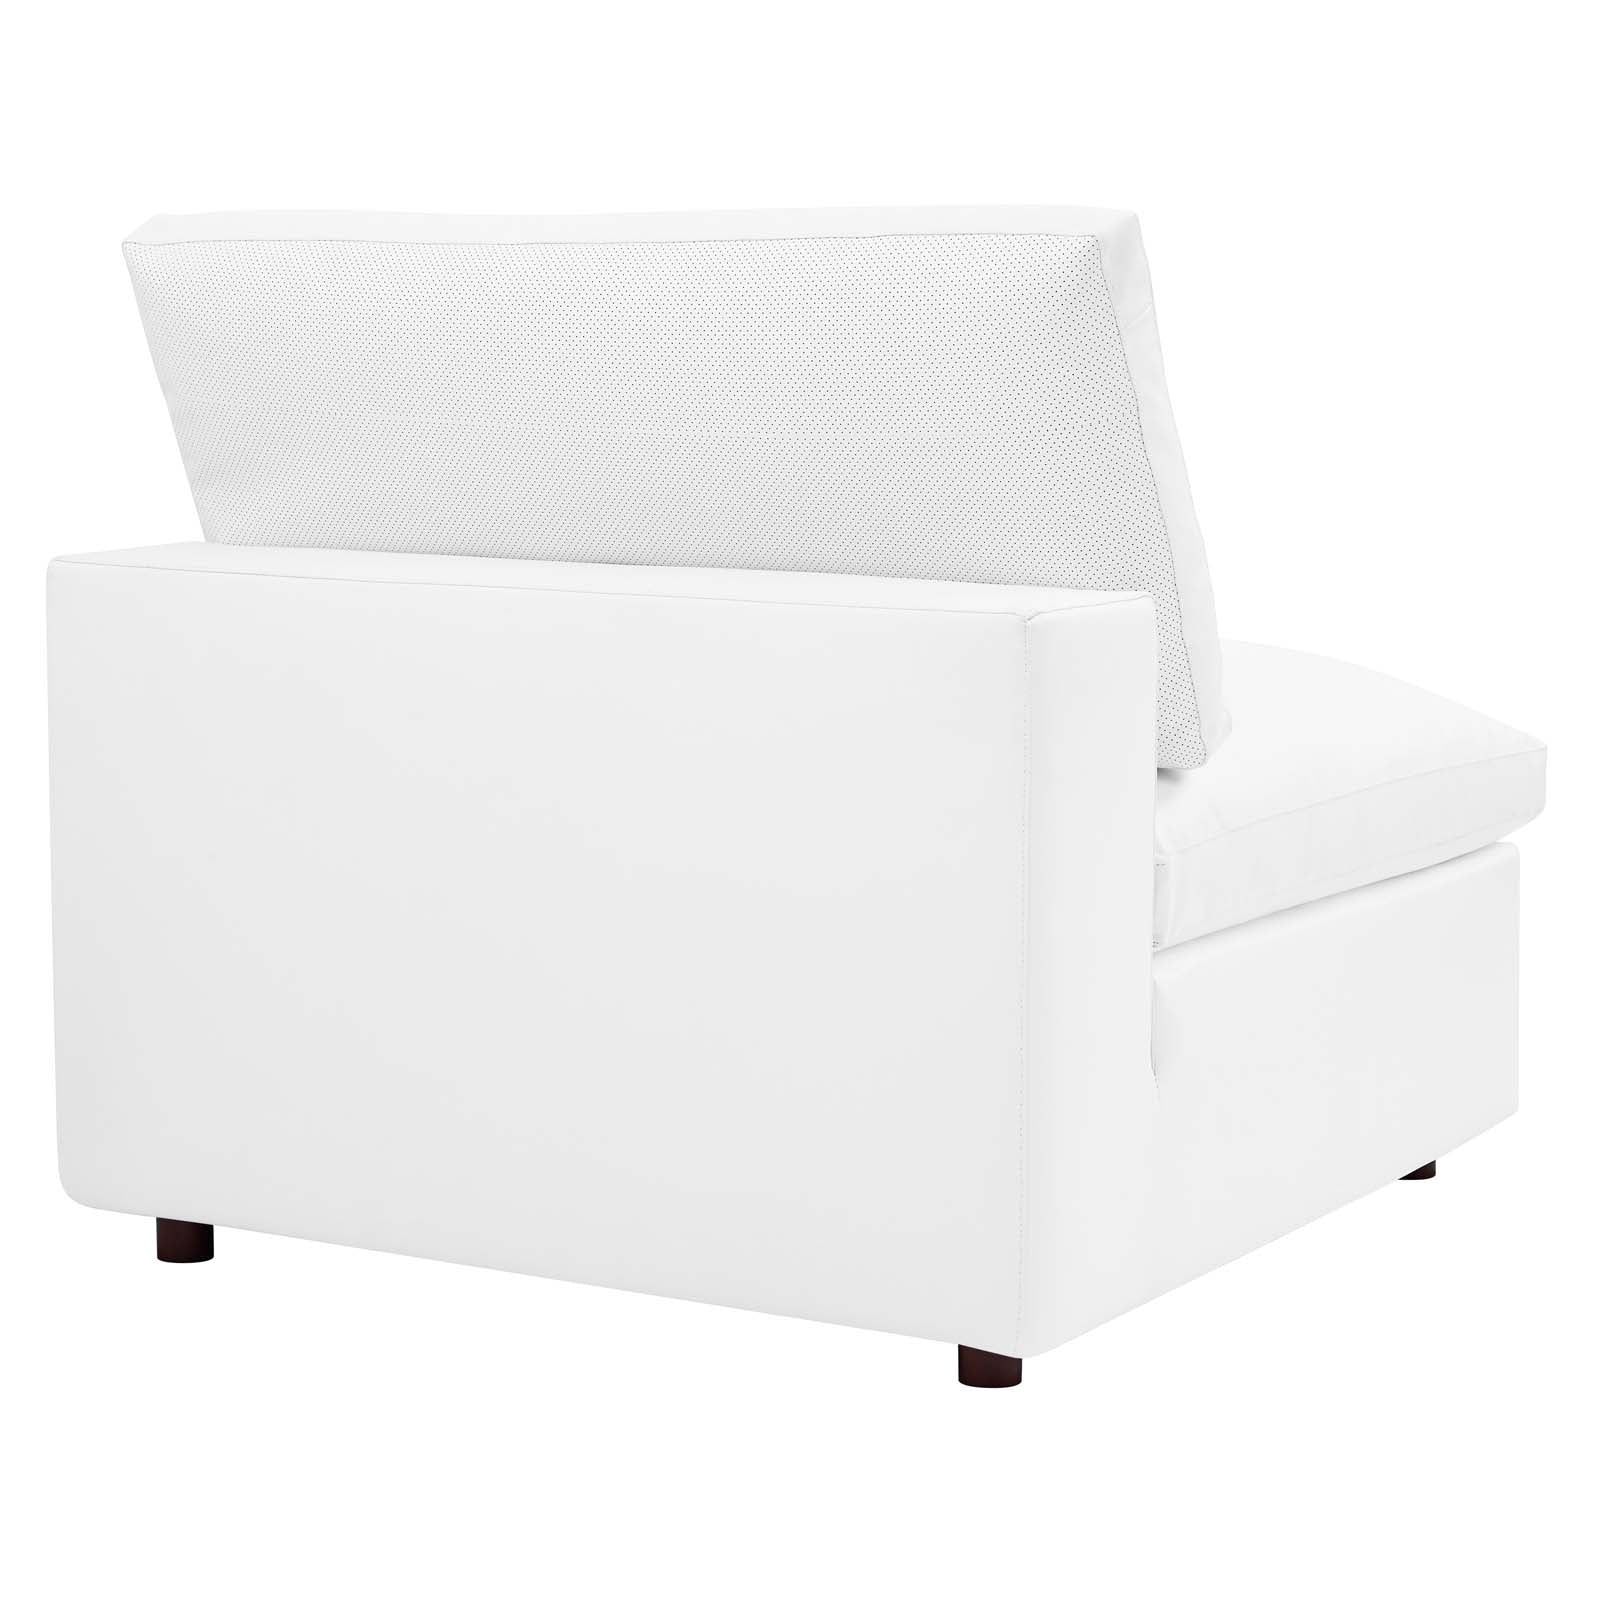 Modway Sectional Sofas - Commix Down Filled Overstuffed Vegan Leather 7 Piece Sectional Sofa White